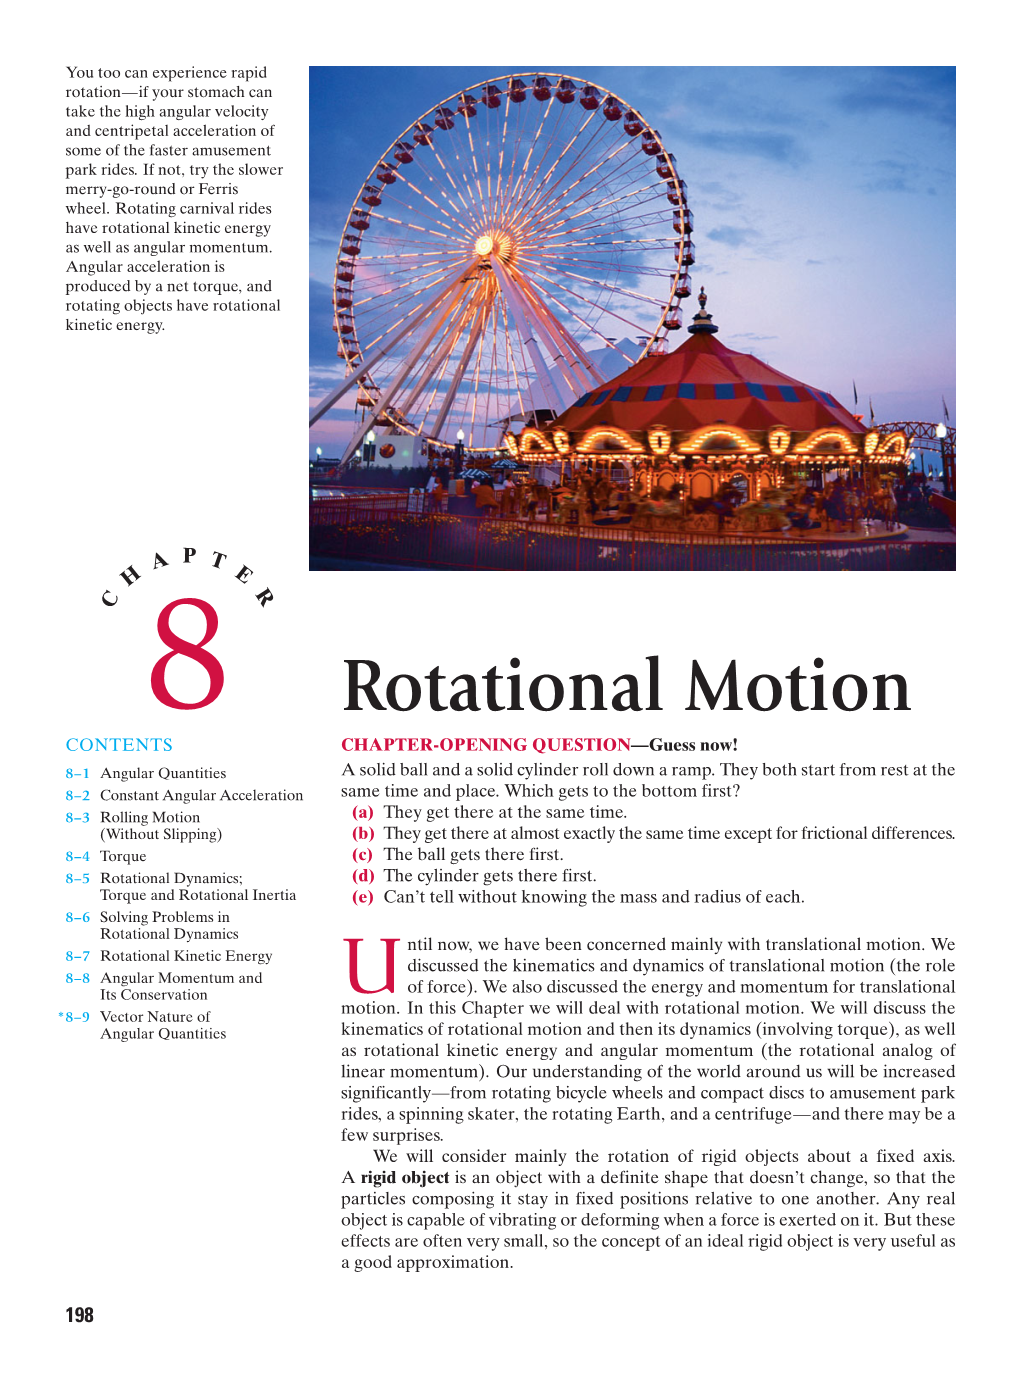 Rotational Motion CONTENTS CHAPTER-OPENING QUESTION—Guess Now! 8–1 Angular Quantities a Solid Ball and a Solid Cylinder Roll Down a Ramp